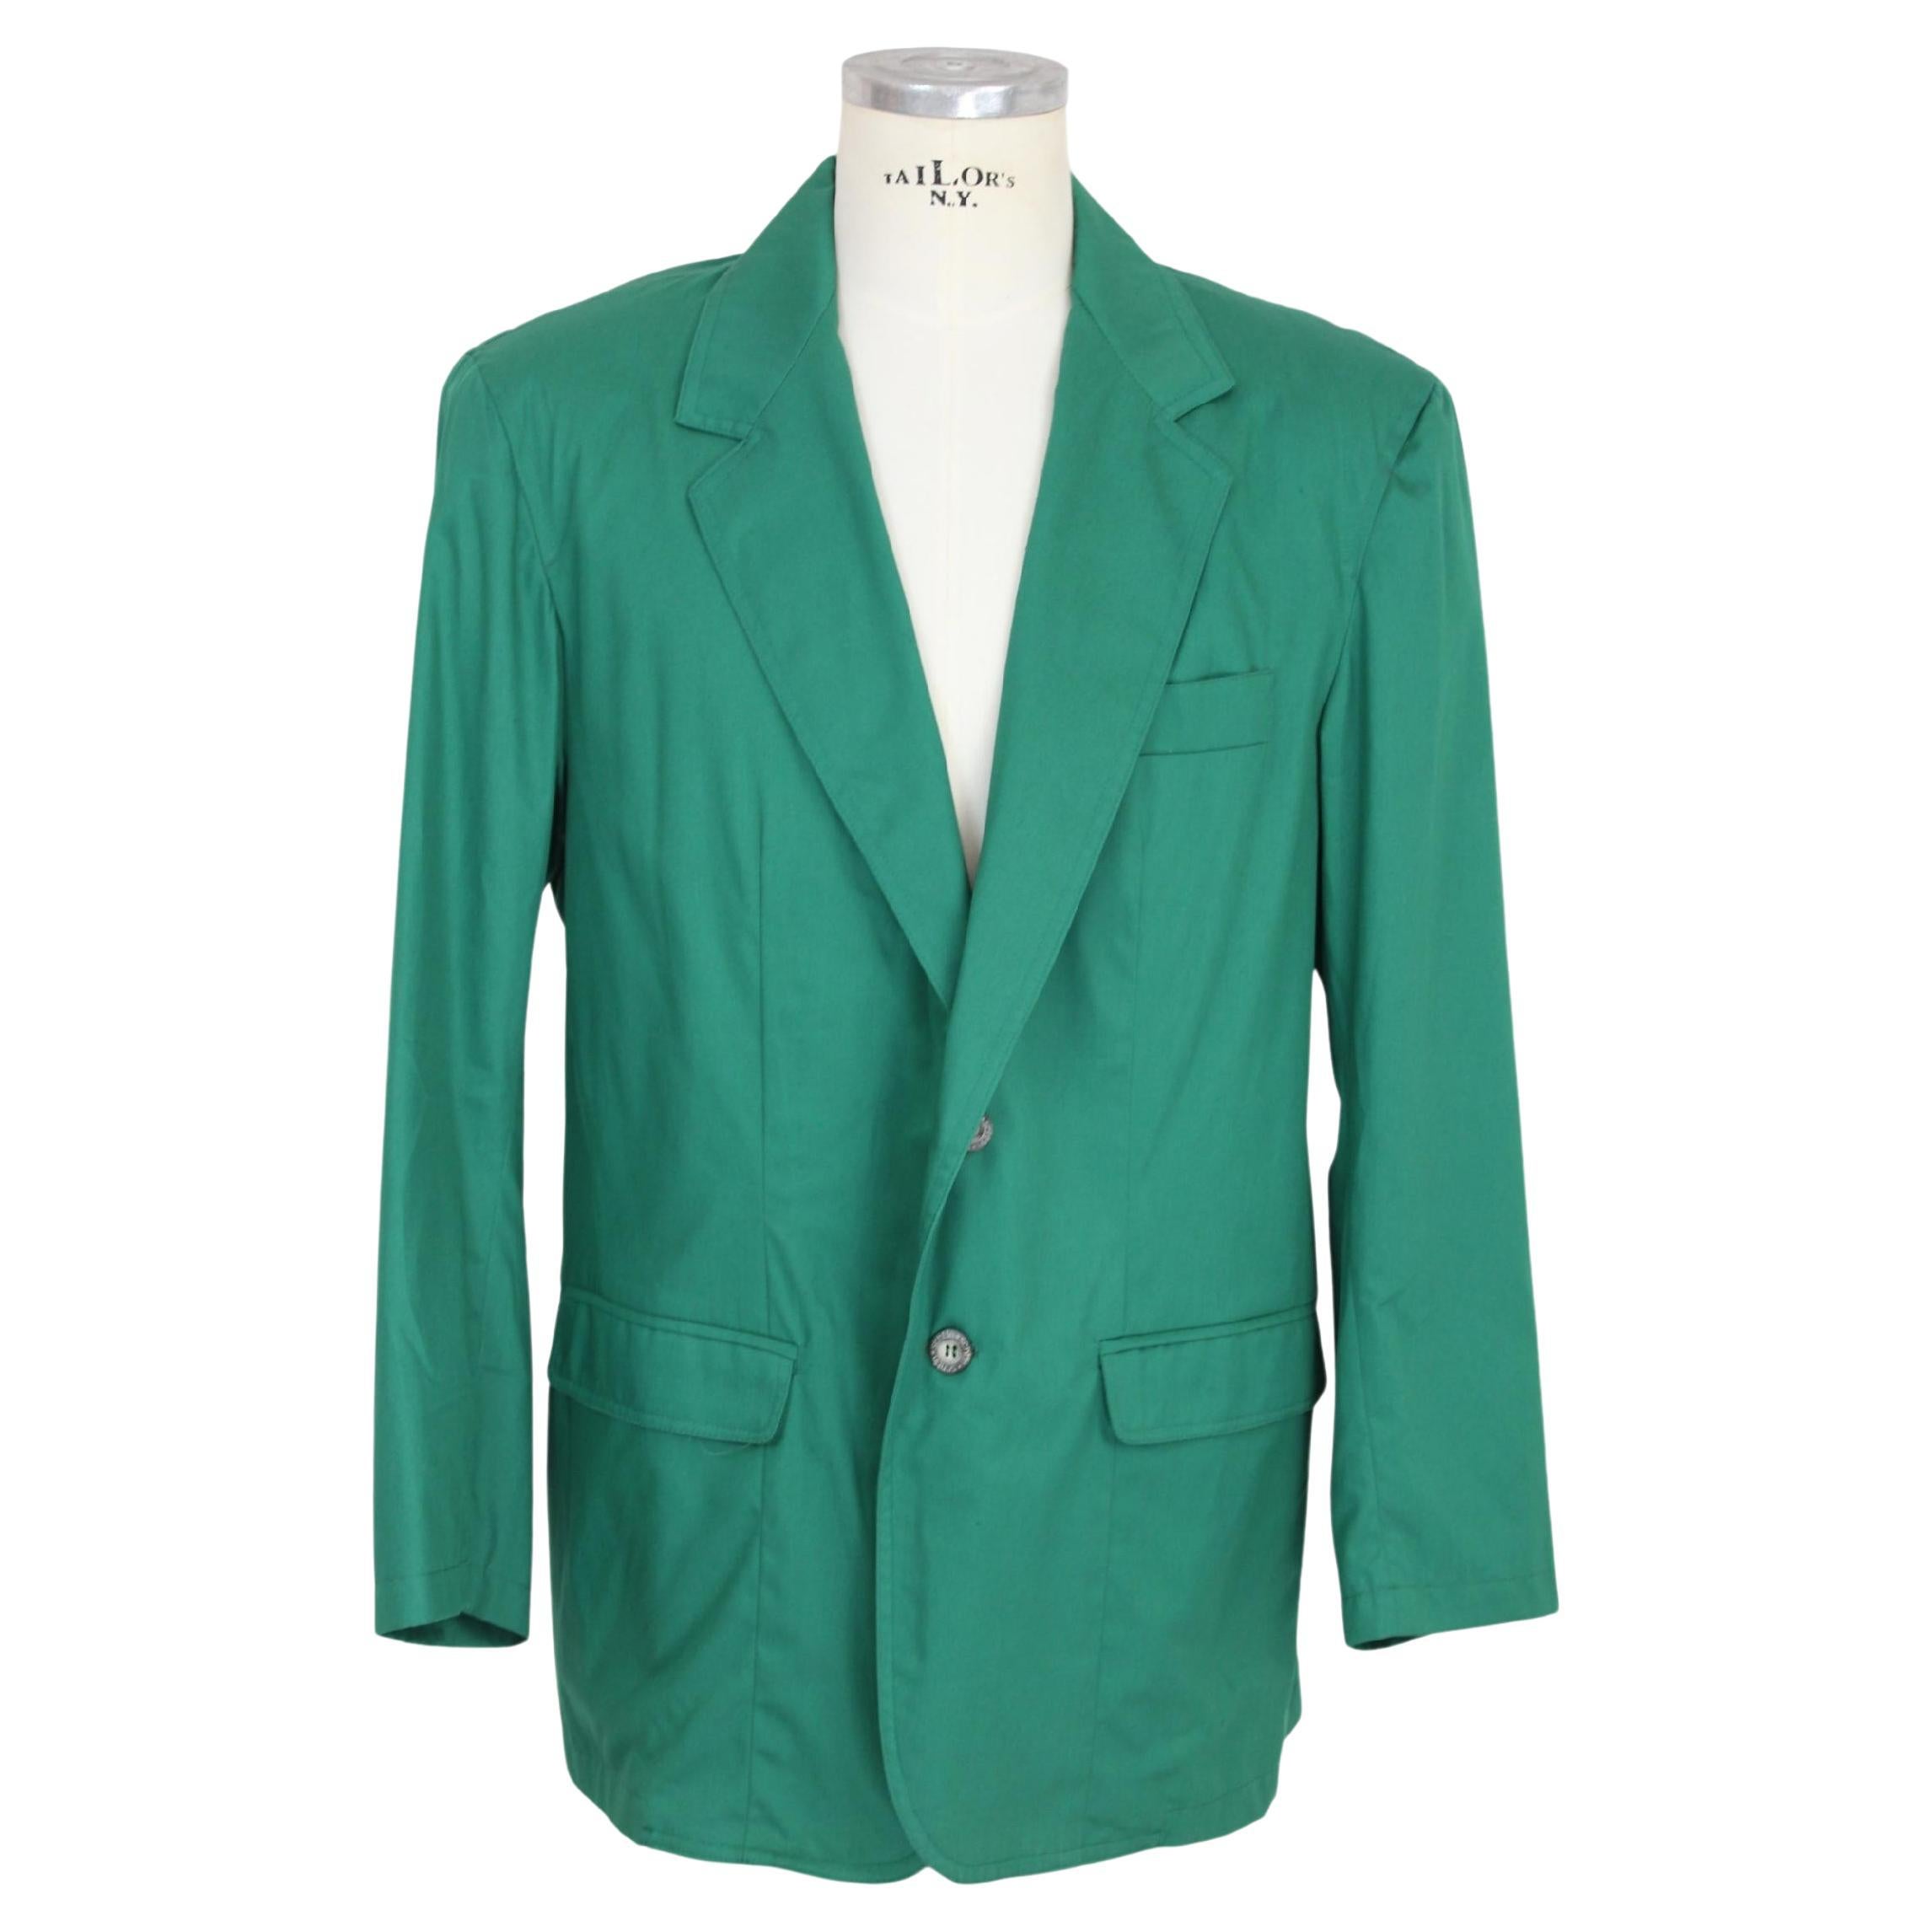 Mila Schon Green Cotton Casual Jacket For Sale